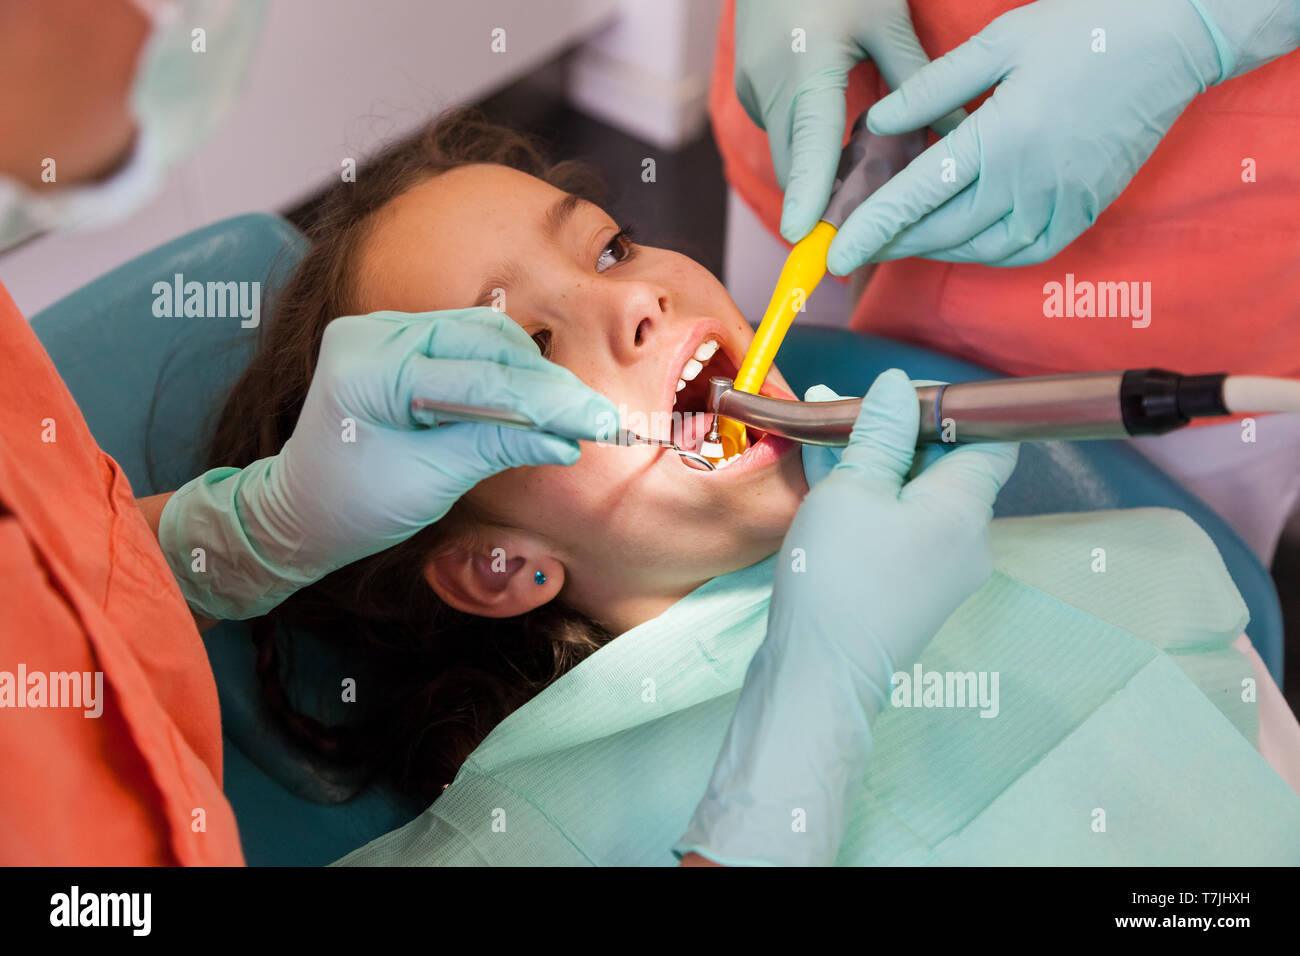 Pretty 10-year-old girl at the dentist, examination with dentist tools Stock Photo